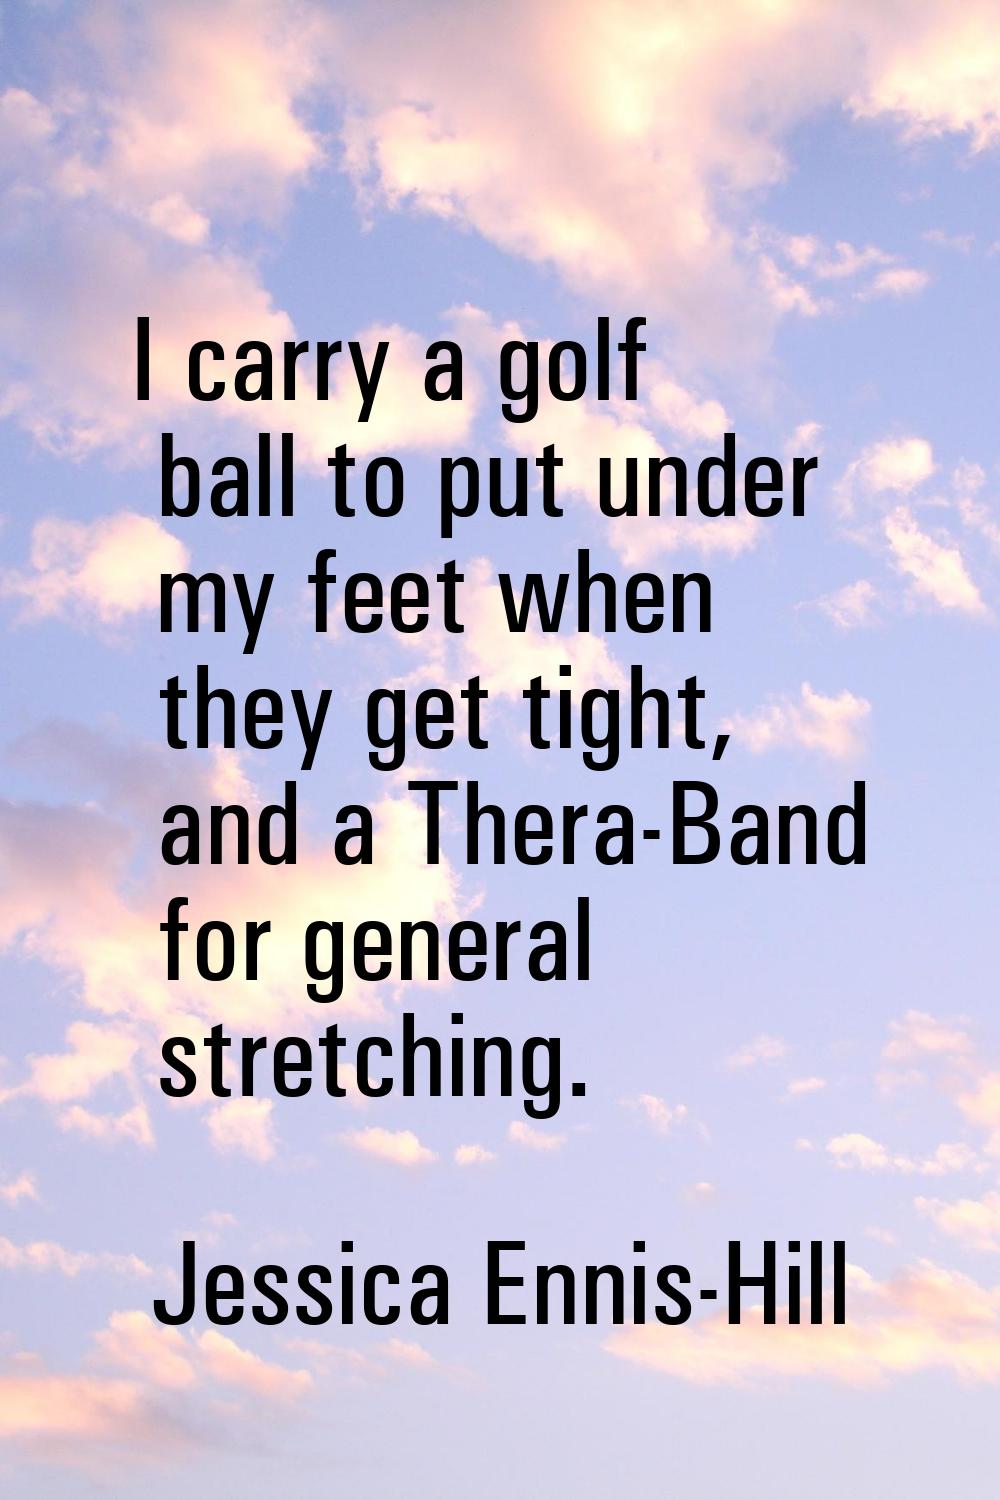 I carry a golf ball to put under my feet when they get tight, and a Thera-Band for general stretchi